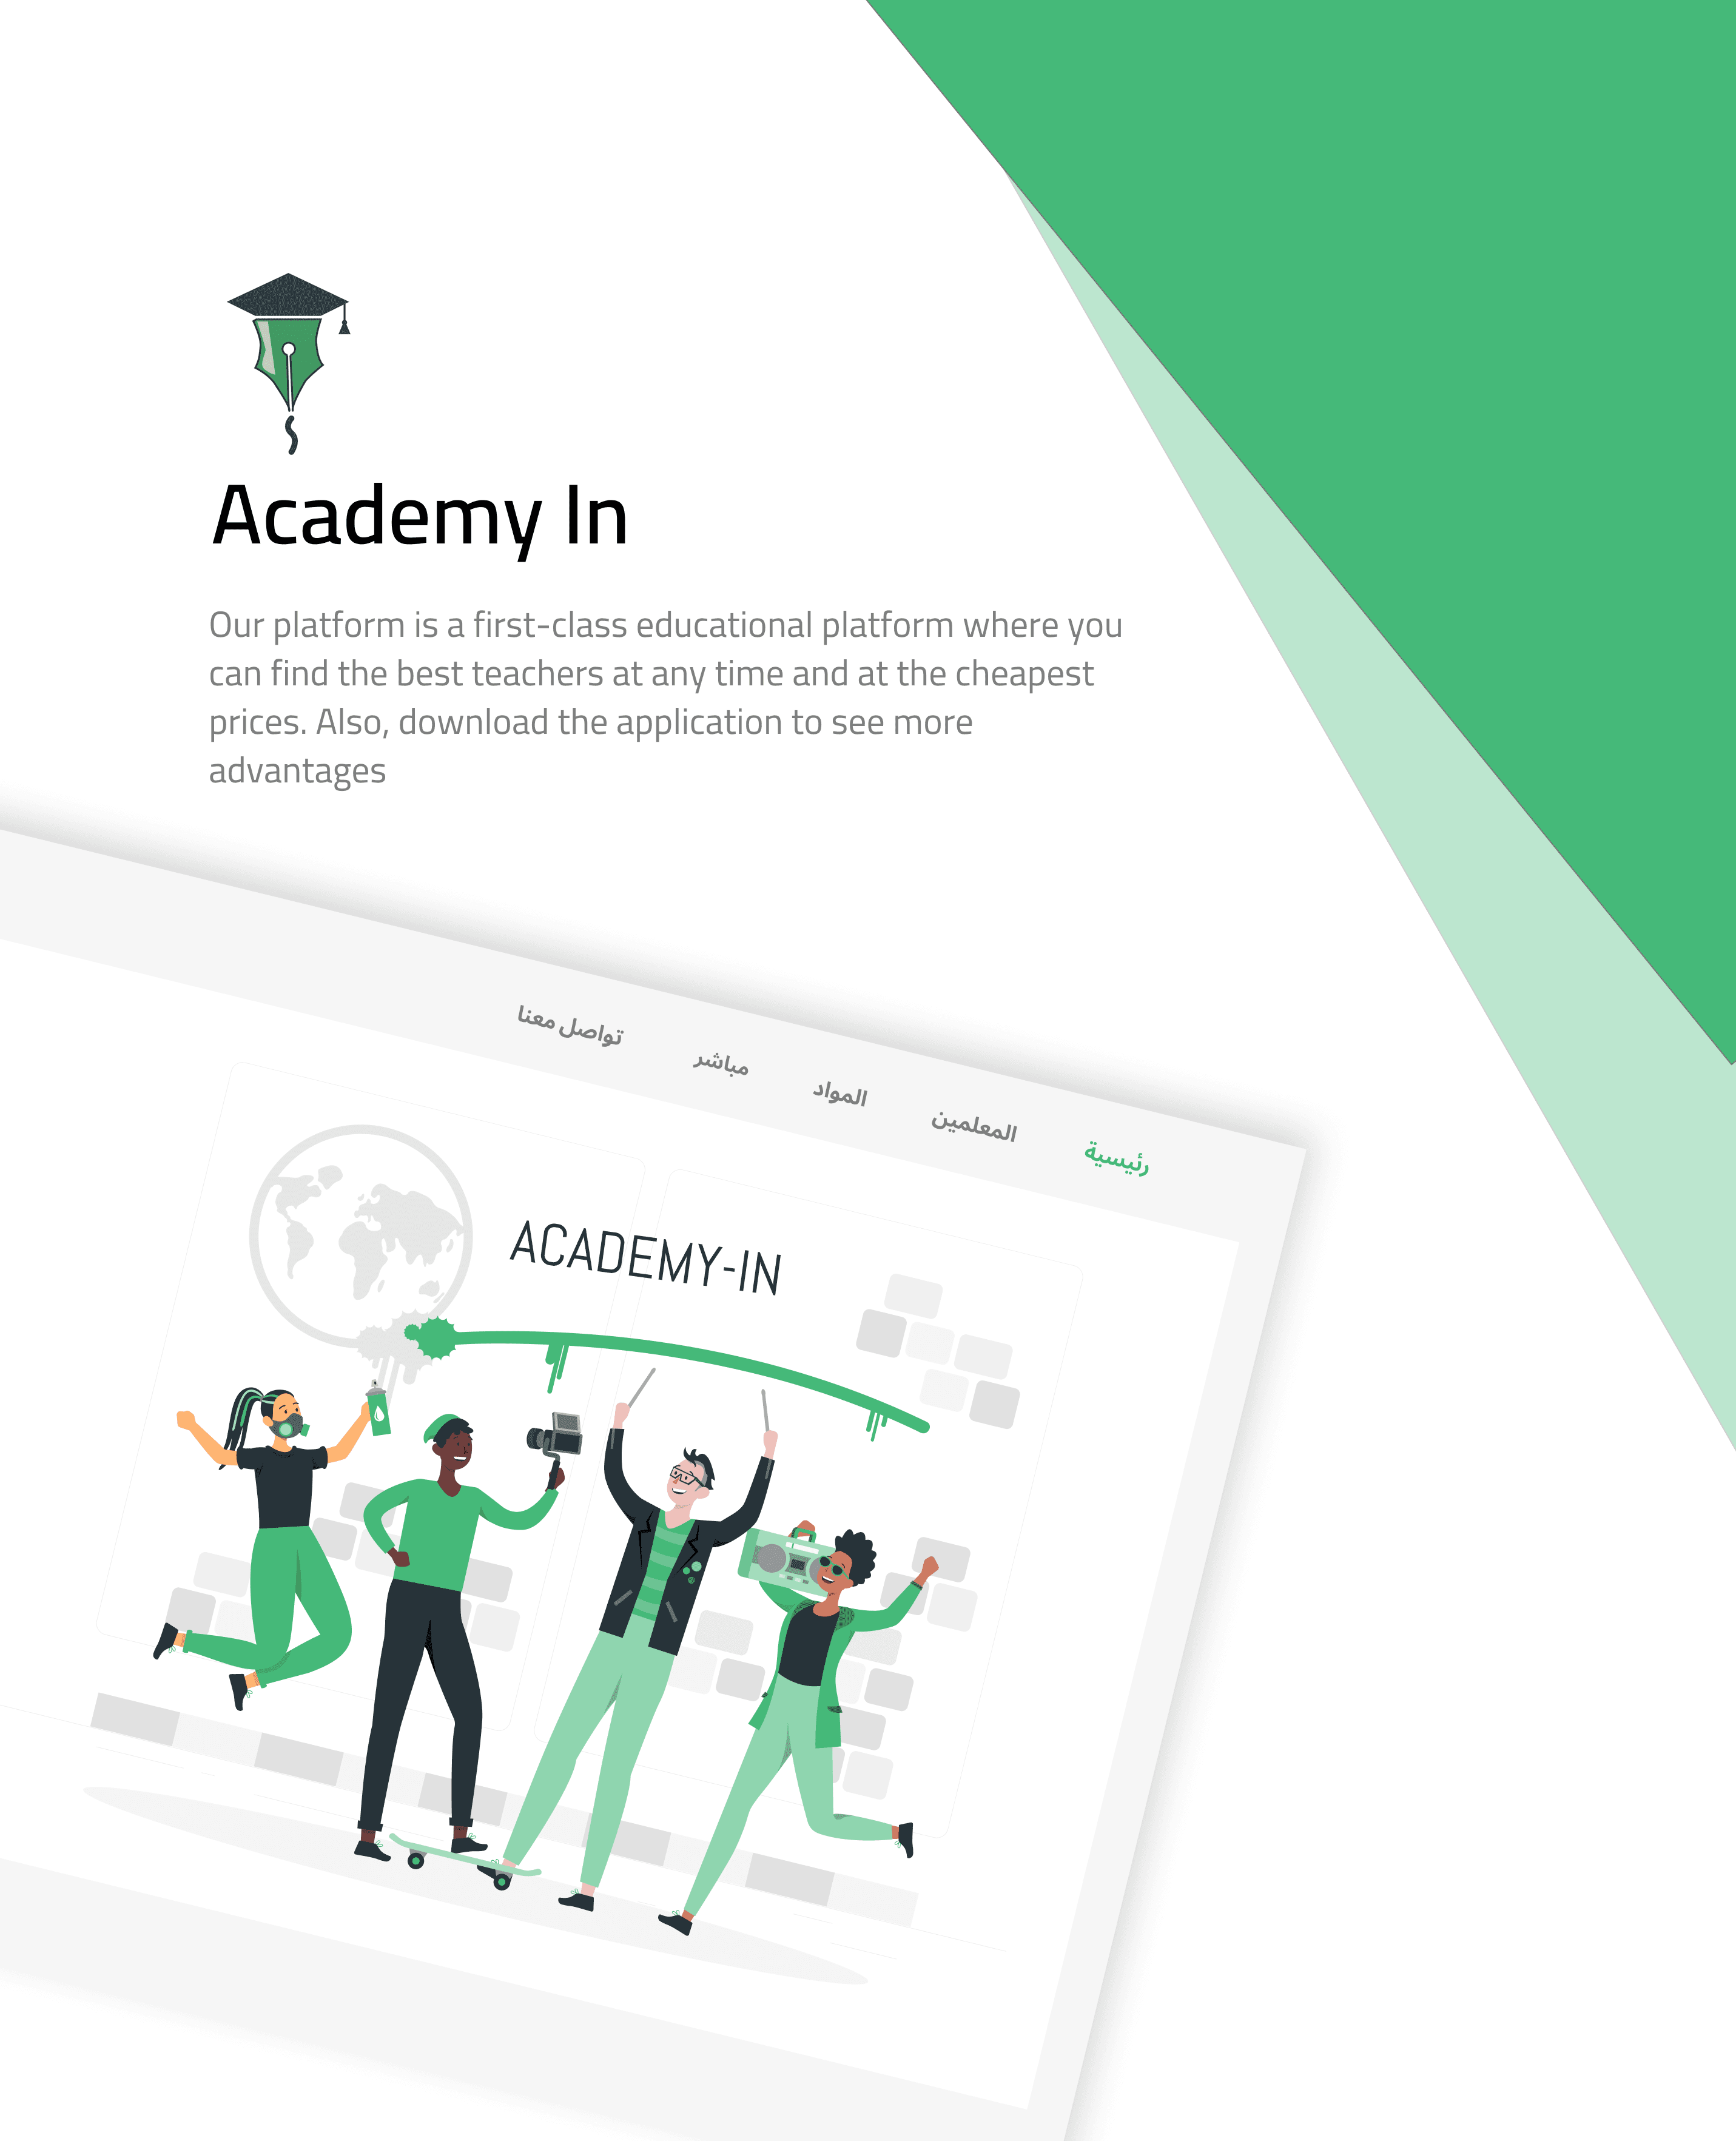 Academy In